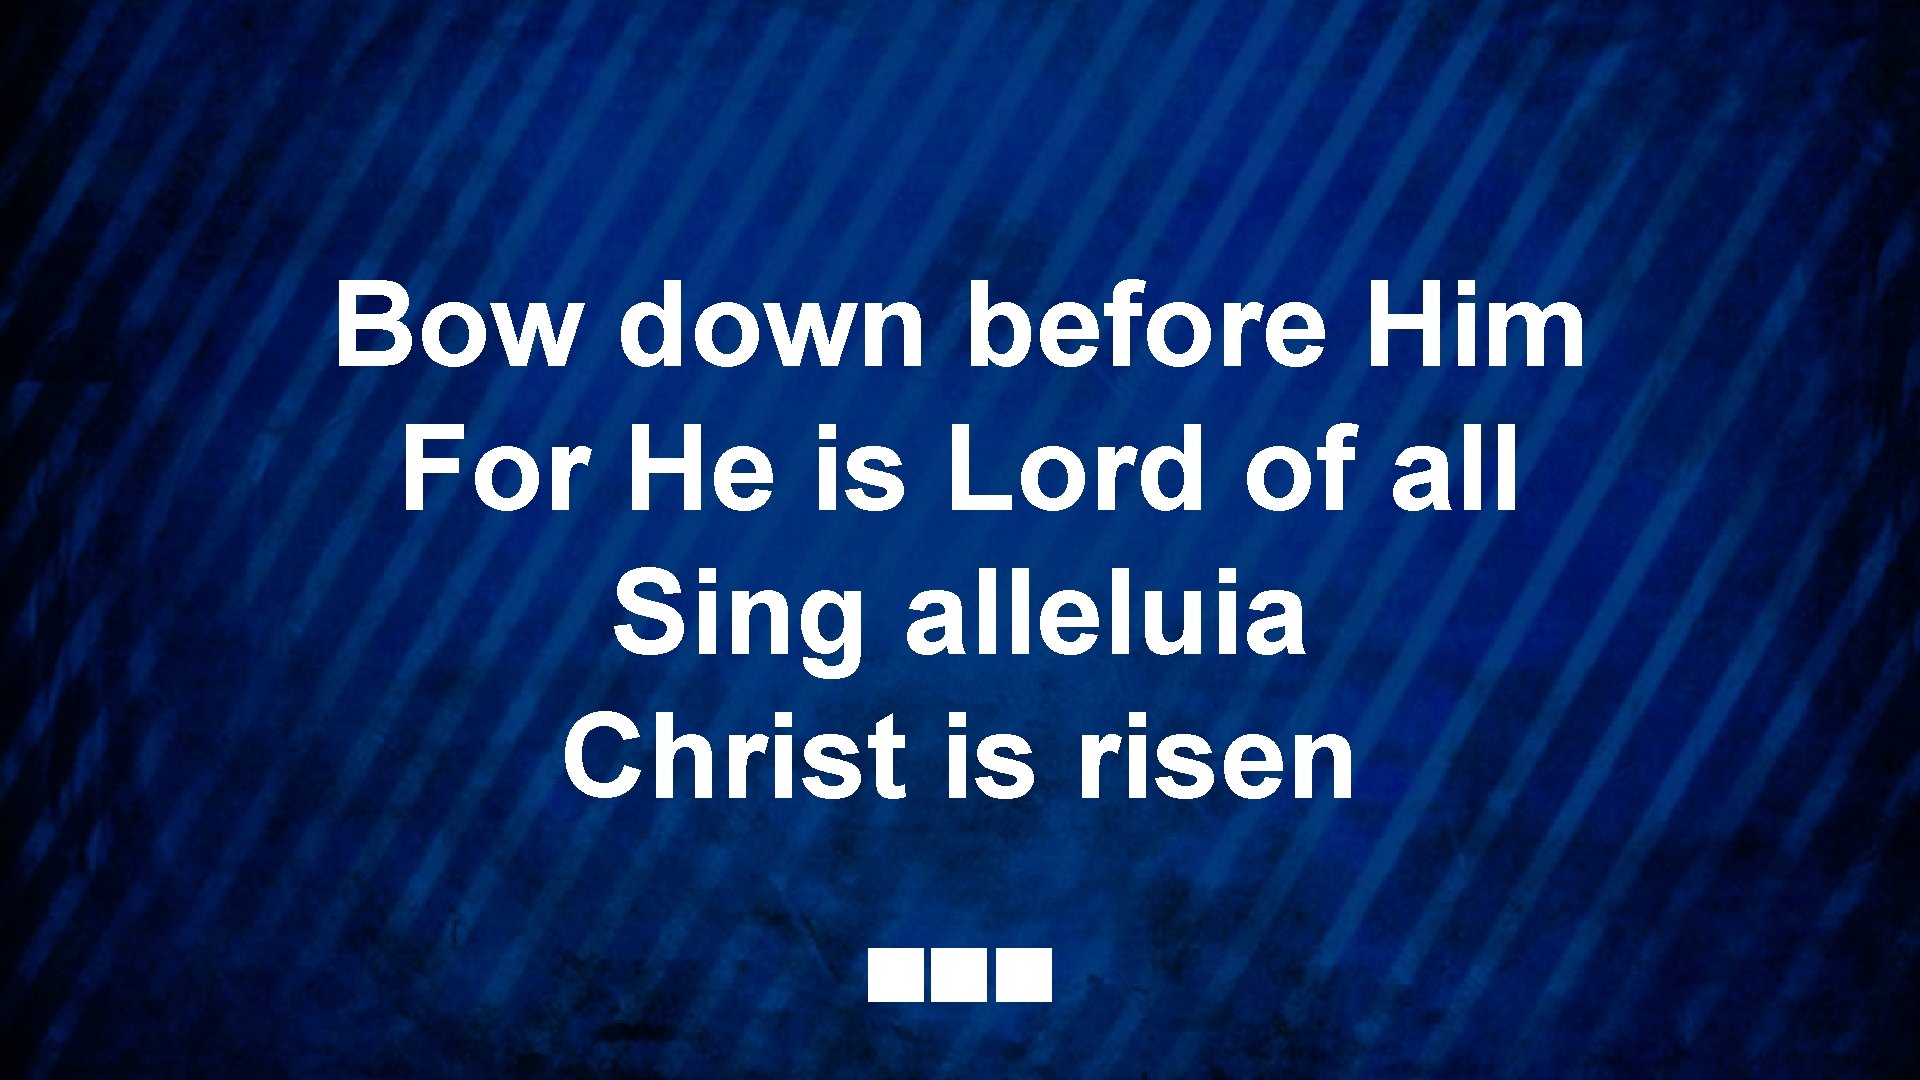 Bow down before Him For He is Lord of all Sing alleluia Christ is